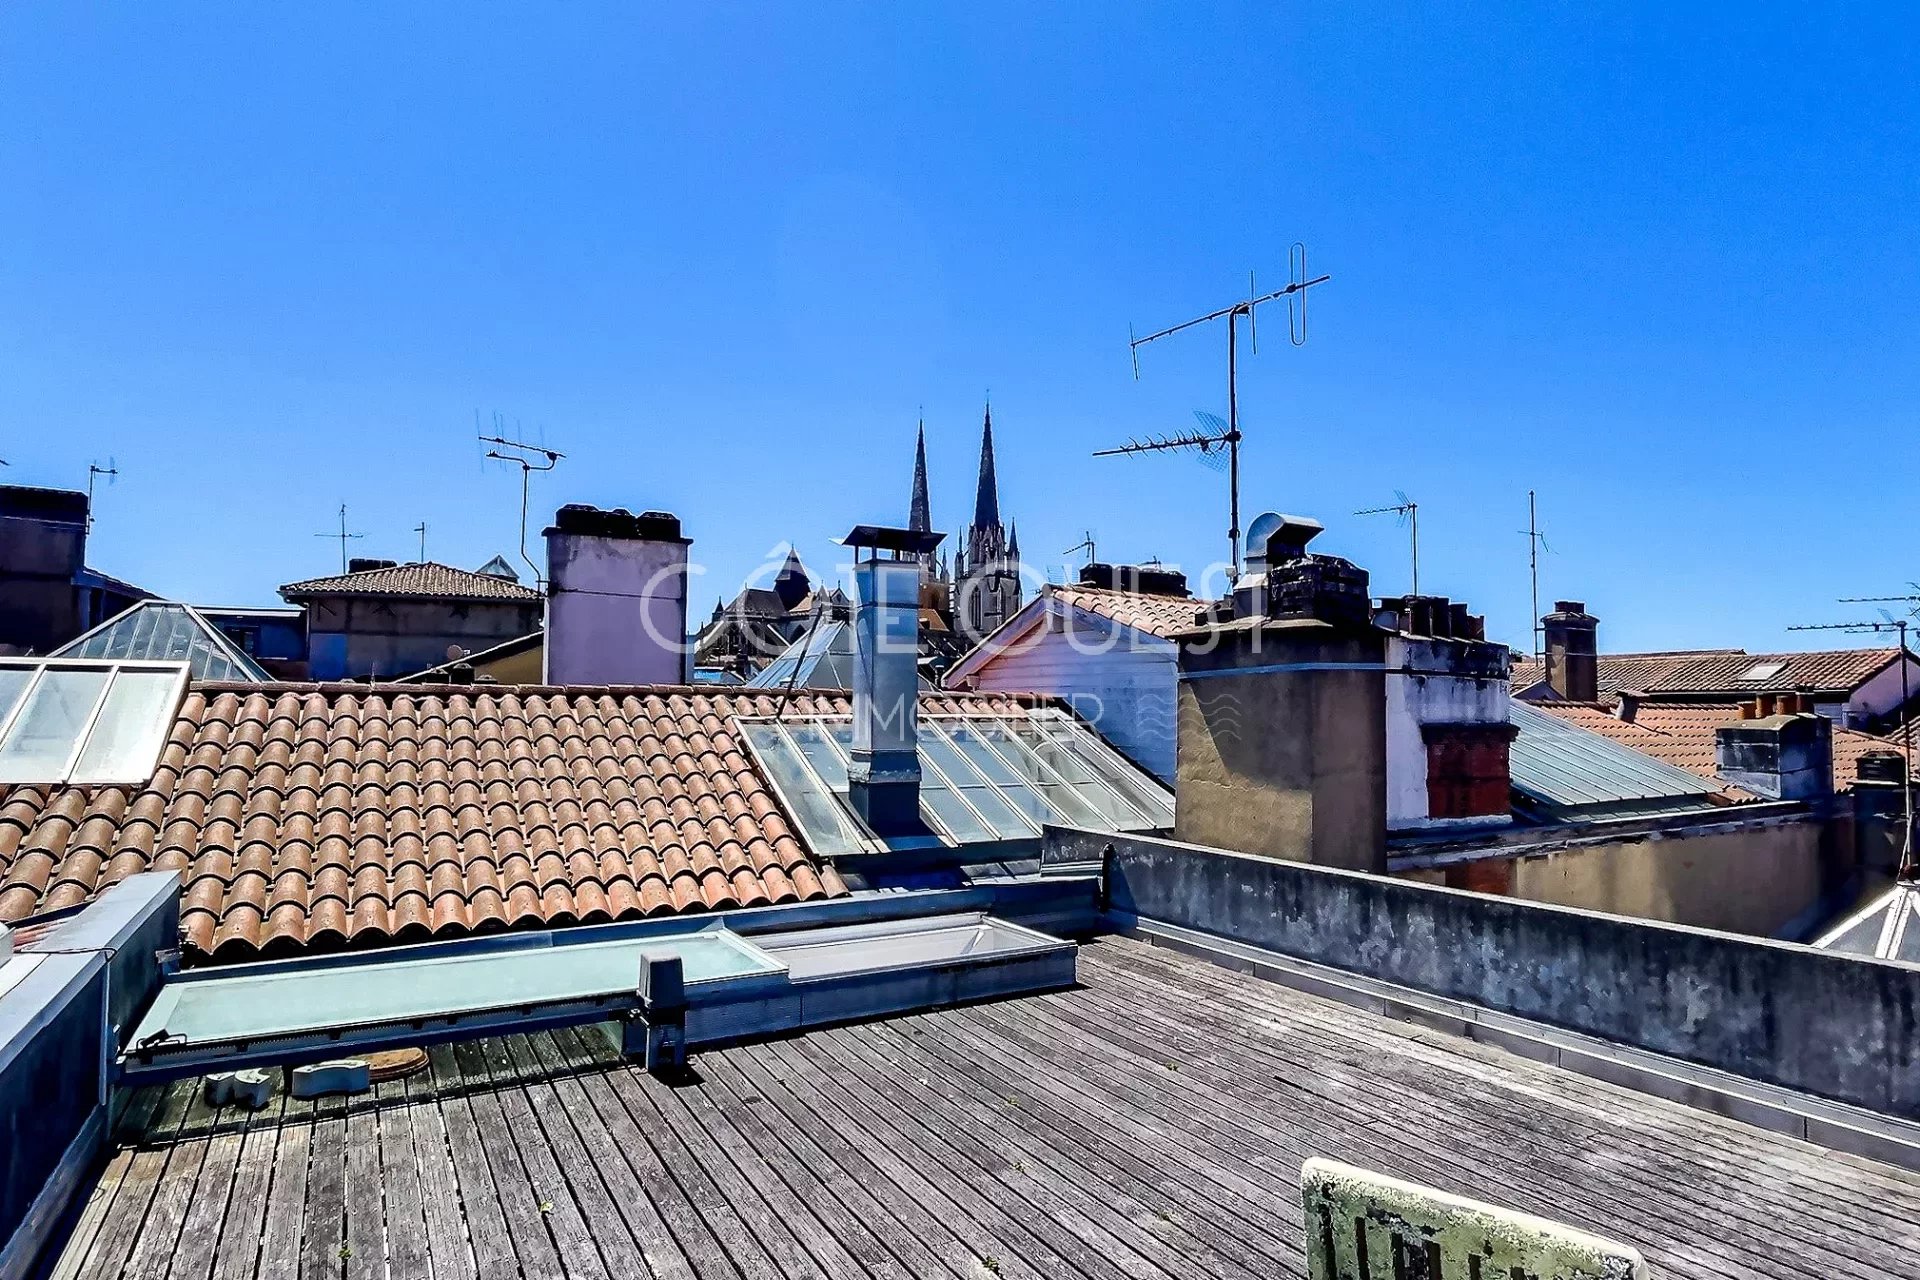 BAYONNE CENTRE – A 5-ROOM APARTMENT WITH A ROOFTOP TERRACE